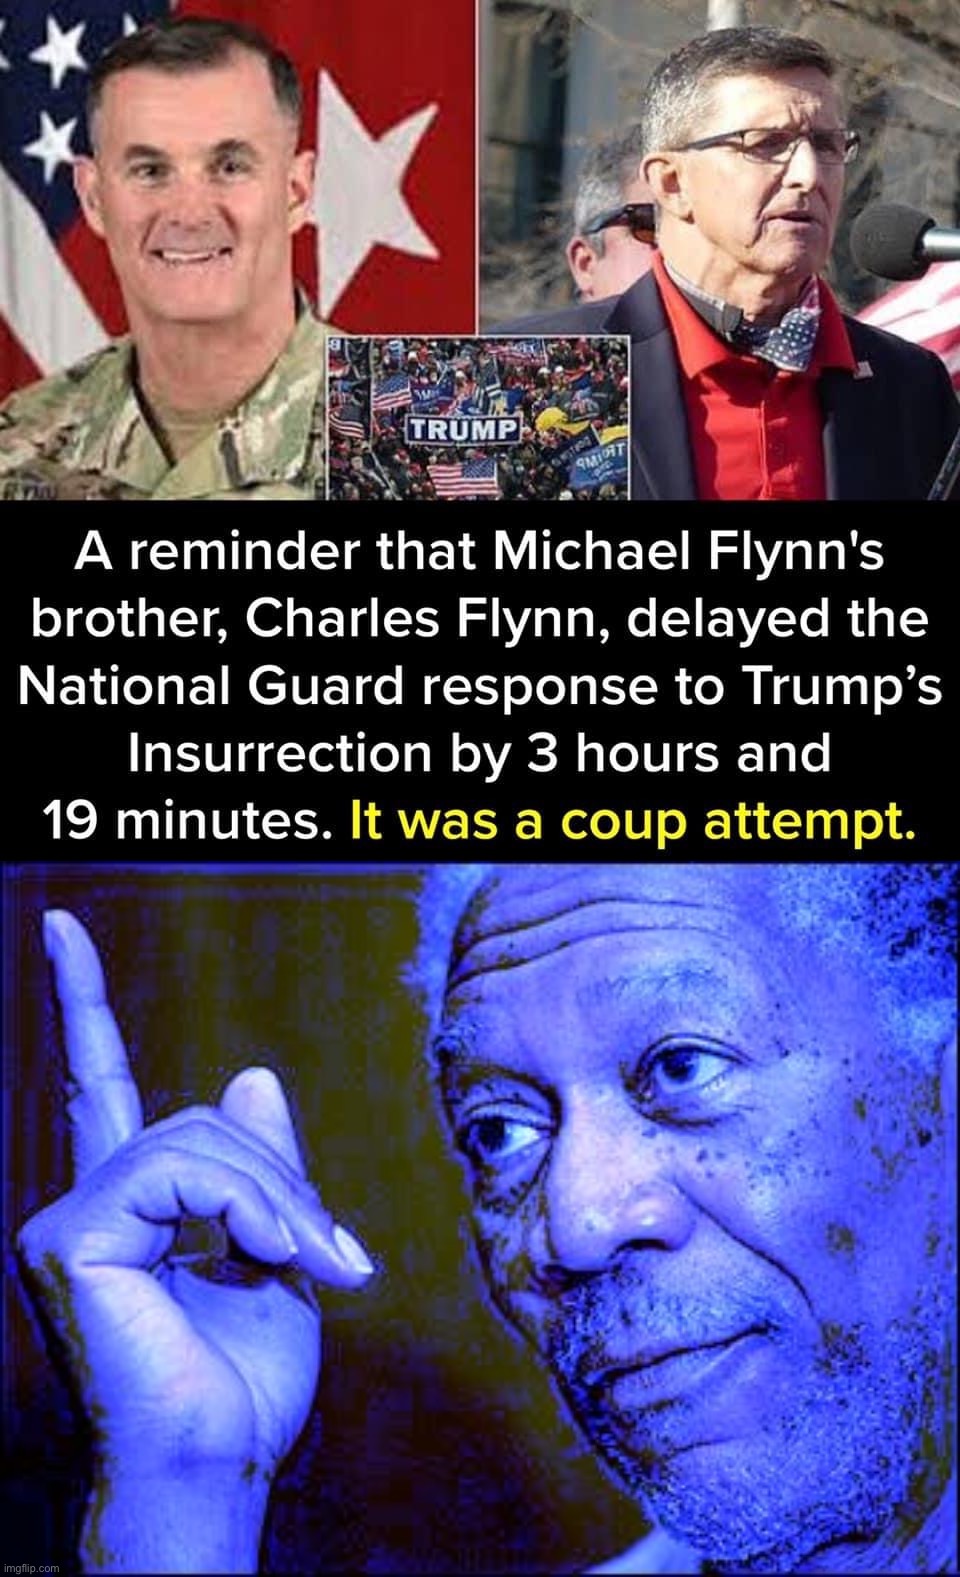 Let that sink in. Then let it sink in some more. | image tagged in michael flynn coup attempt,morgan freeman this blue version,coup,traitor,traitors | made w/ Imgflip meme maker